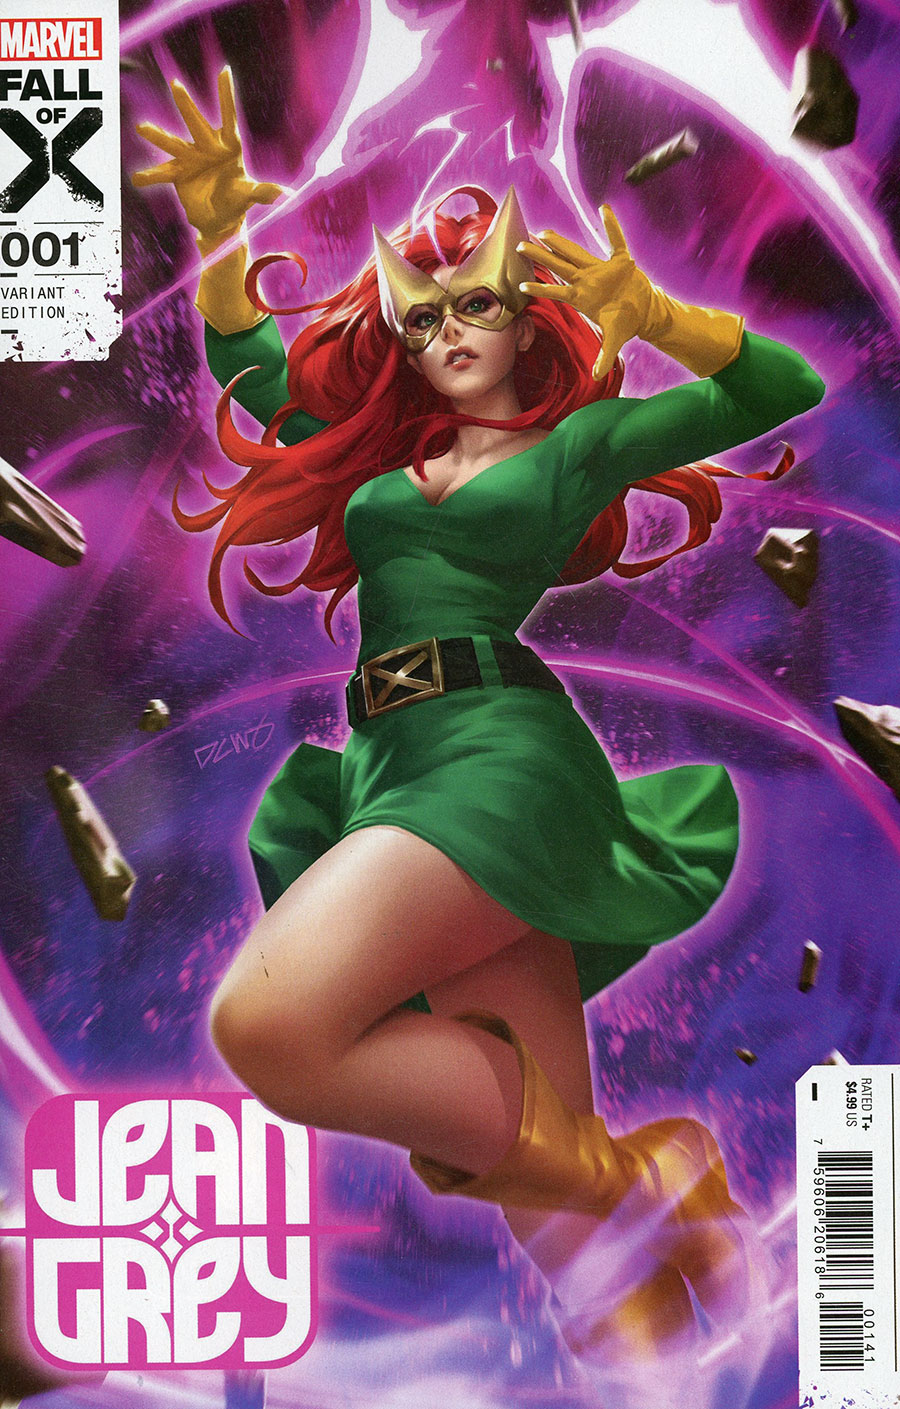 Jean Grey Vol 2 #1 Cover D Variant Derrick Chew Jean Grey Cover (Fall Of X Tie-In)